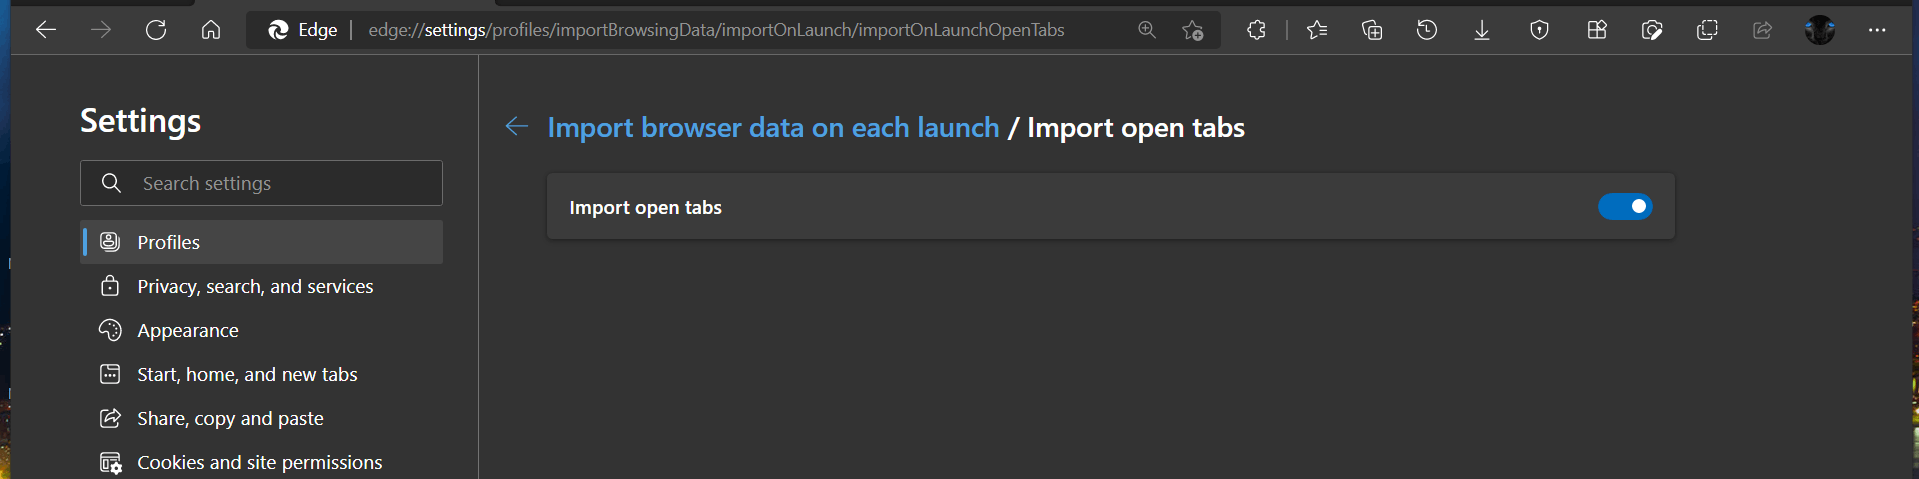 Edge Import open tabs on launch